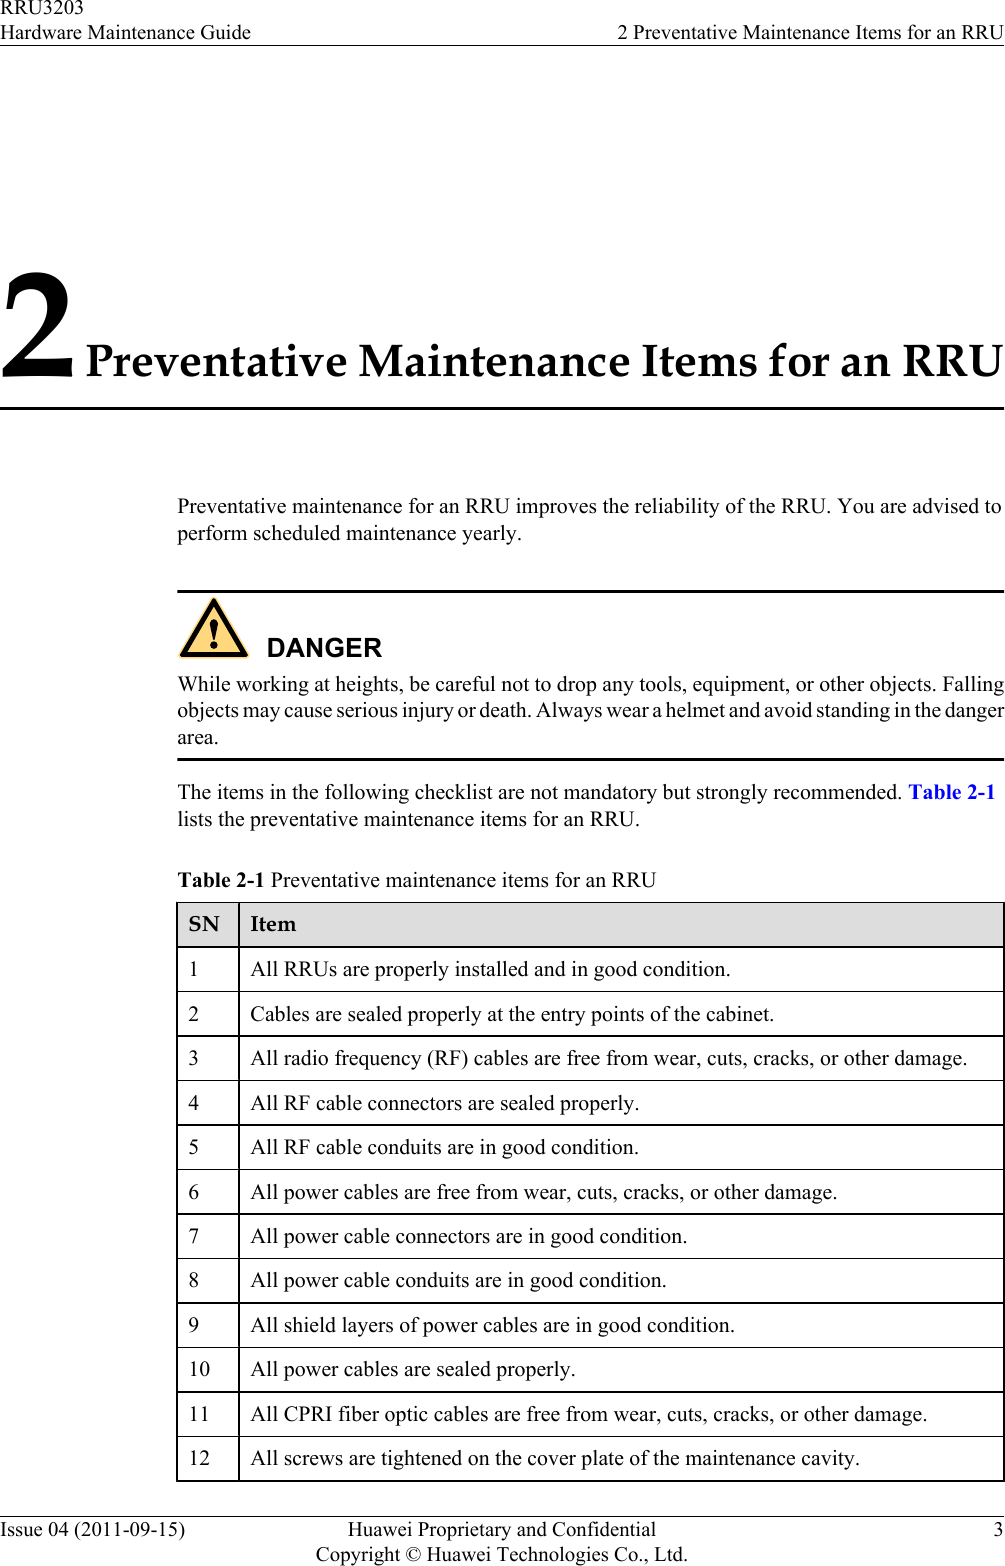 2 Preventative Maintenance Items for an RRUPreventative maintenance for an RRU improves the reliability of the RRU. You are advised toperform scheduled maintenance yearly.DANGERWhile working at heights, be careful not to drop any tools, equipment, or other objects. Fallingobjects may cause serious injury or death. Always wear a helmet and avoid standing in the dangerarea.The items in the following checklist are not mandatory but strongly recommended. Table 2-1lists the preventative maintenance items for an RRU.Table 2-1 Preventative maintenance items for an RRUSN Item1All RRUs are properly installed and in good condition.2 Cables are sealed properly at the entry points of the cabinet.3 All radio frequency (RF) cables are free from wear, cuts, cracks, or other damage.4 All RF cable connectors are sealed properly.5 All RF cable conduits are in good condition.6 All power cables are free from wear, cuts, cracks, or other damage.7 All power cable connectors are in good condition.8 All power cable conduits are in good condition.9 All shield layers of power cables are in good condition.10 All power cables are sealed properly.11 All CPRI fiber optic cables are free from wear, cuts, cracks, or other damage.12 All screws are tightened on the cover plate of the maintenance cavity.RRU3203Hardware Maintenance Guide 2 Preventative Maintenance Items for an RRUIssue 04 (2011-09-15) Huawei Proprietary and ConfidentialCopyright © Huawei Technologies Co., Ltd.3